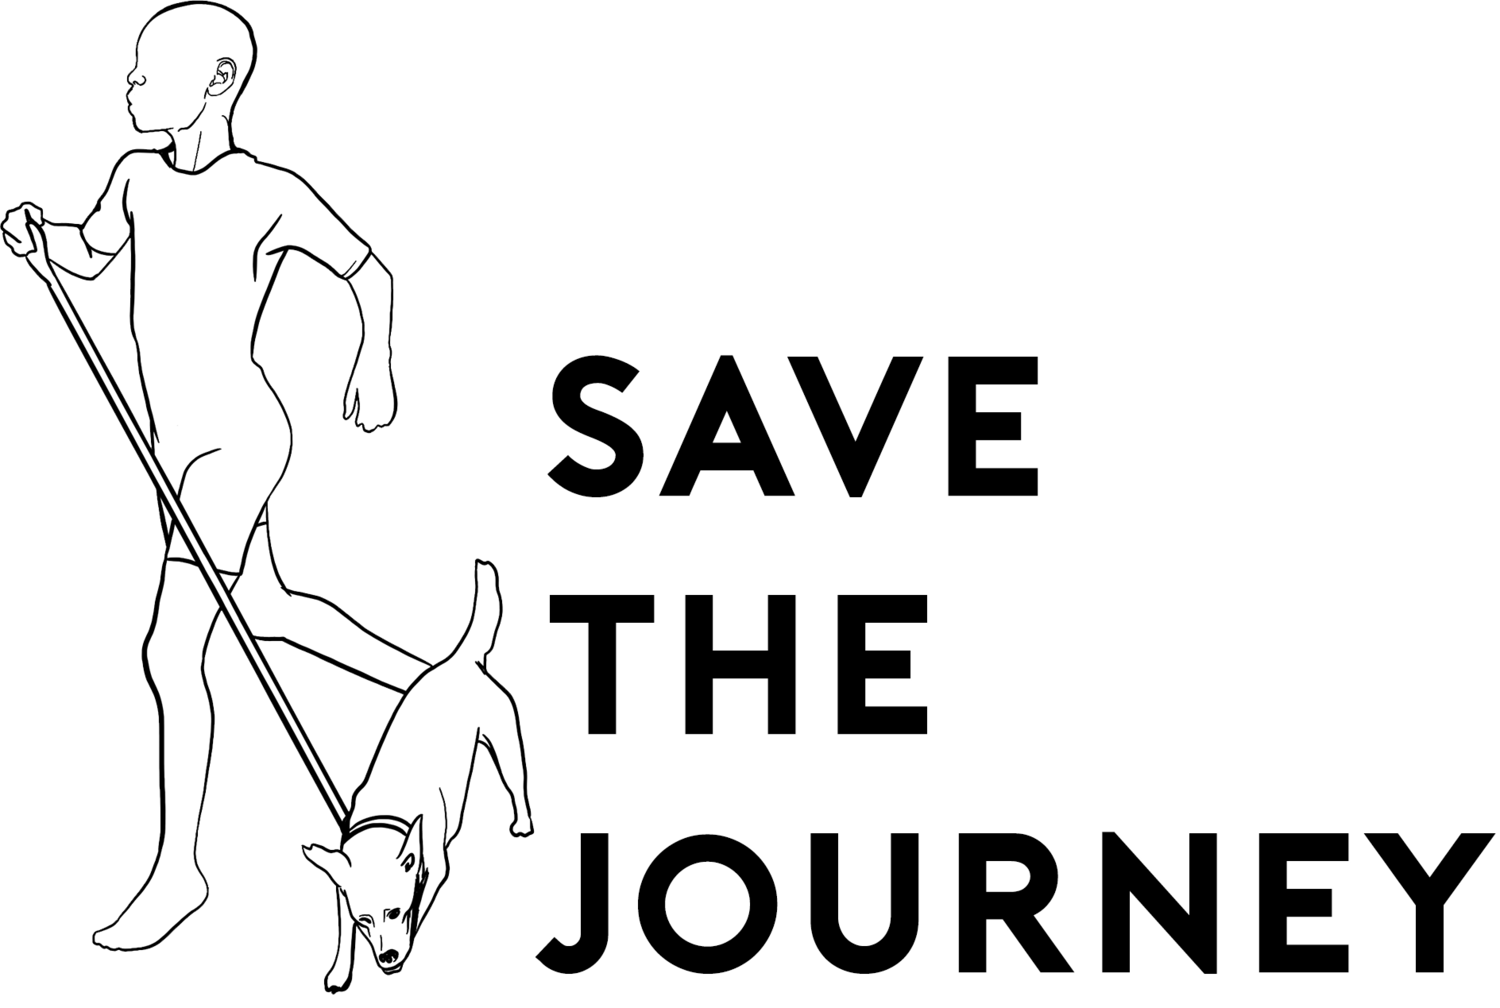 Save The Journey